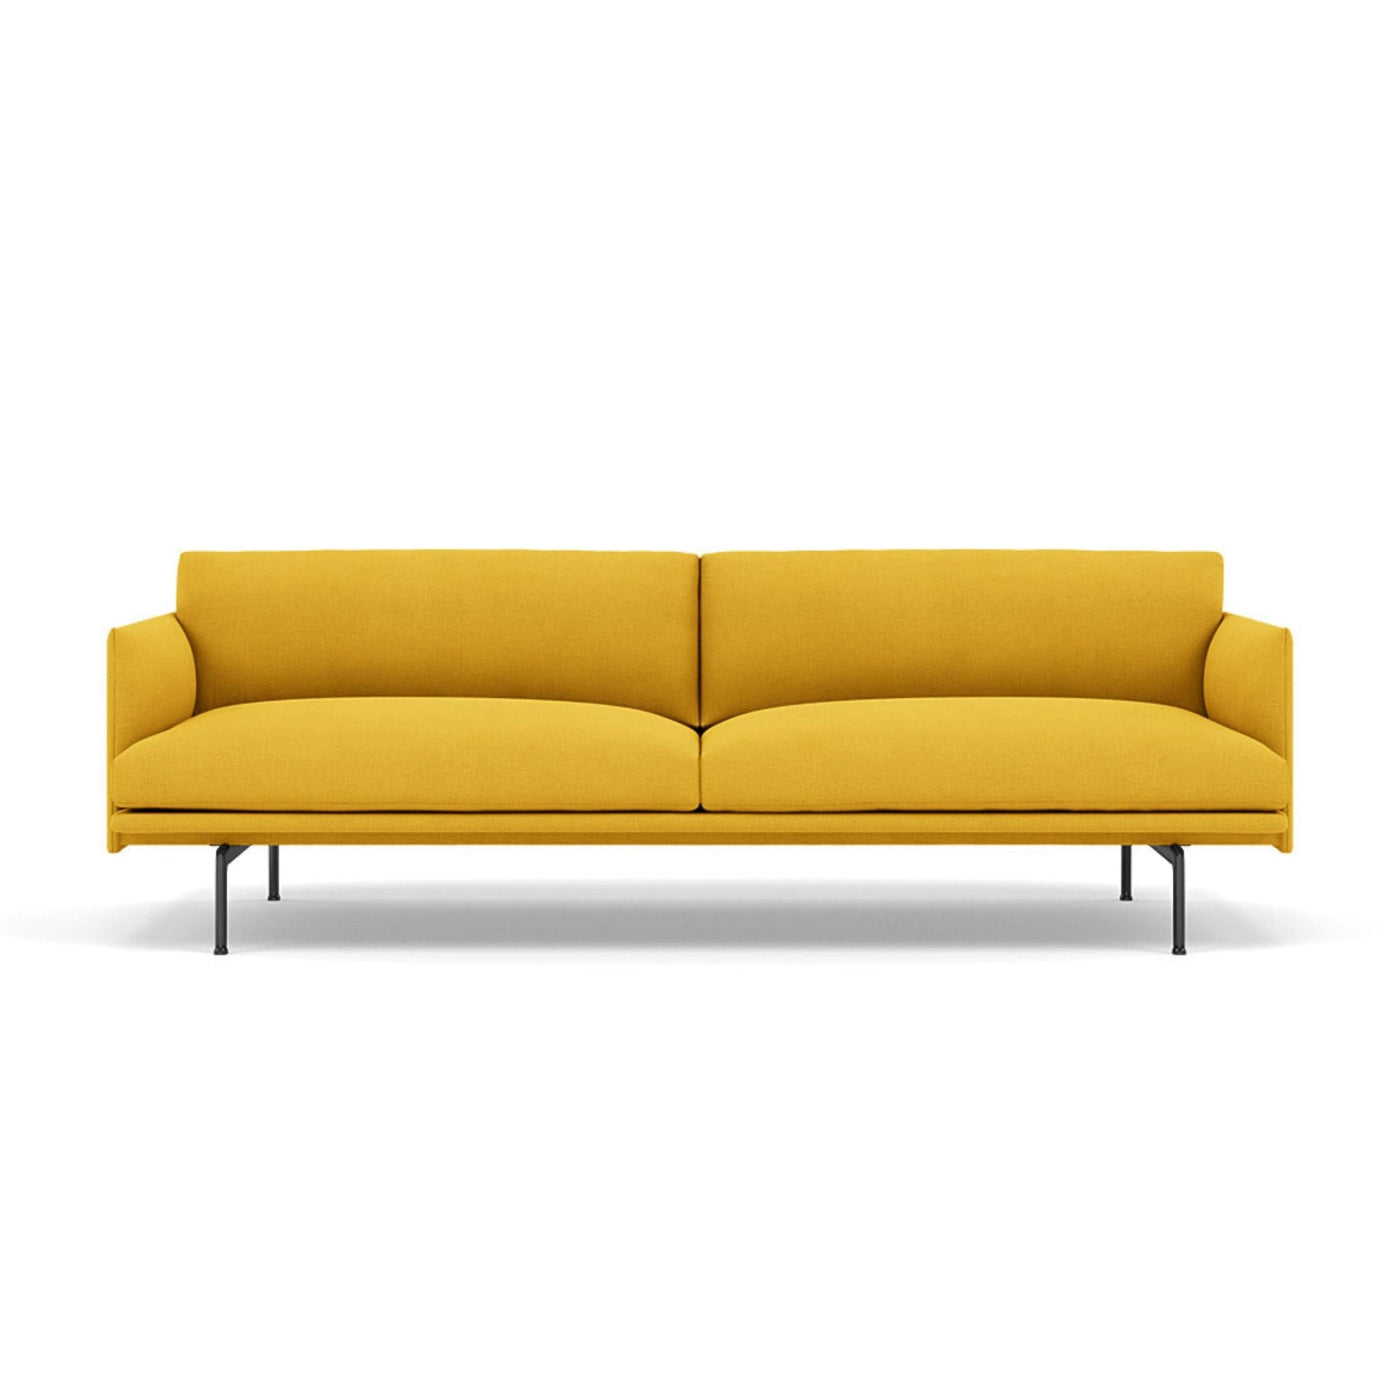 Muuto Outline 3 seater sofa with black legs. Available from someday designs. #colour_hallingdal-457